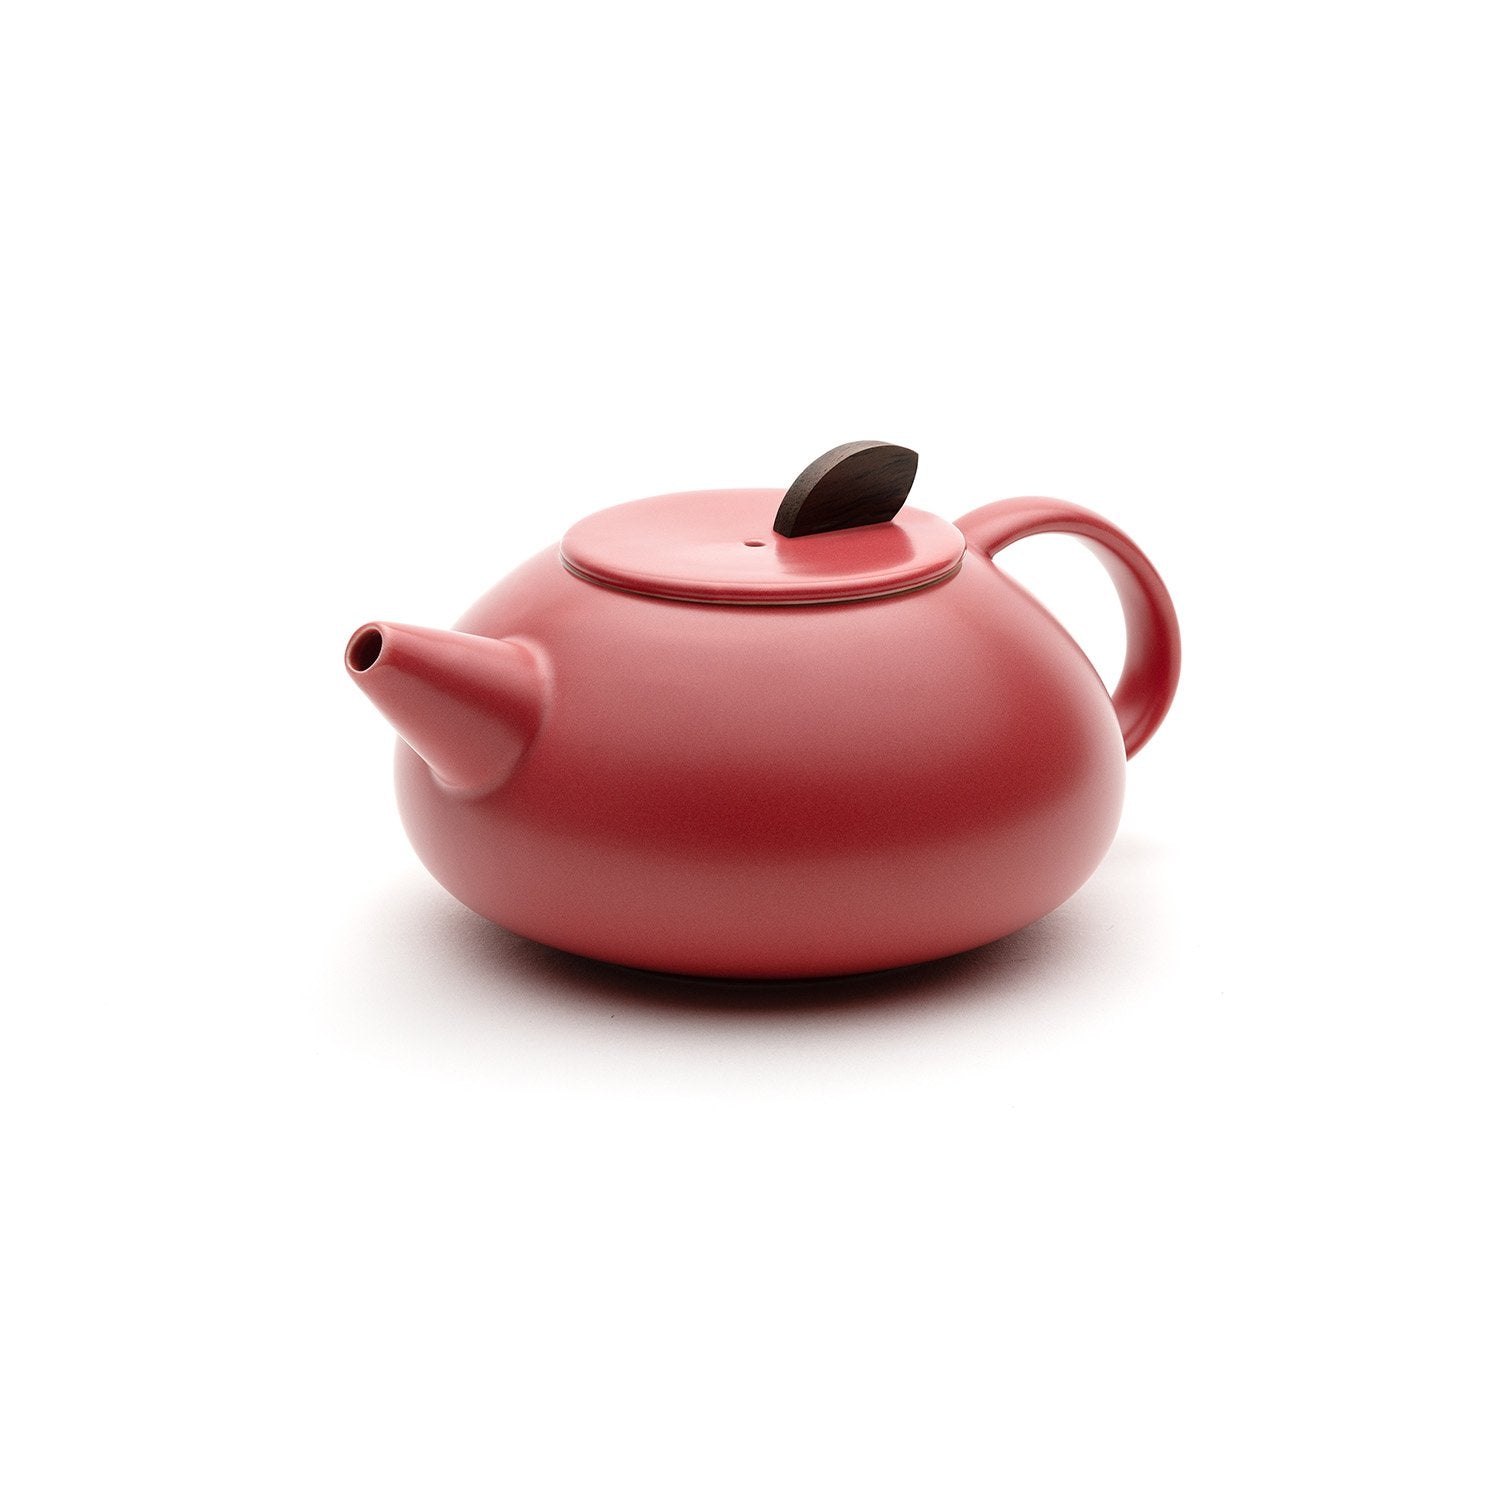 Red small teapot